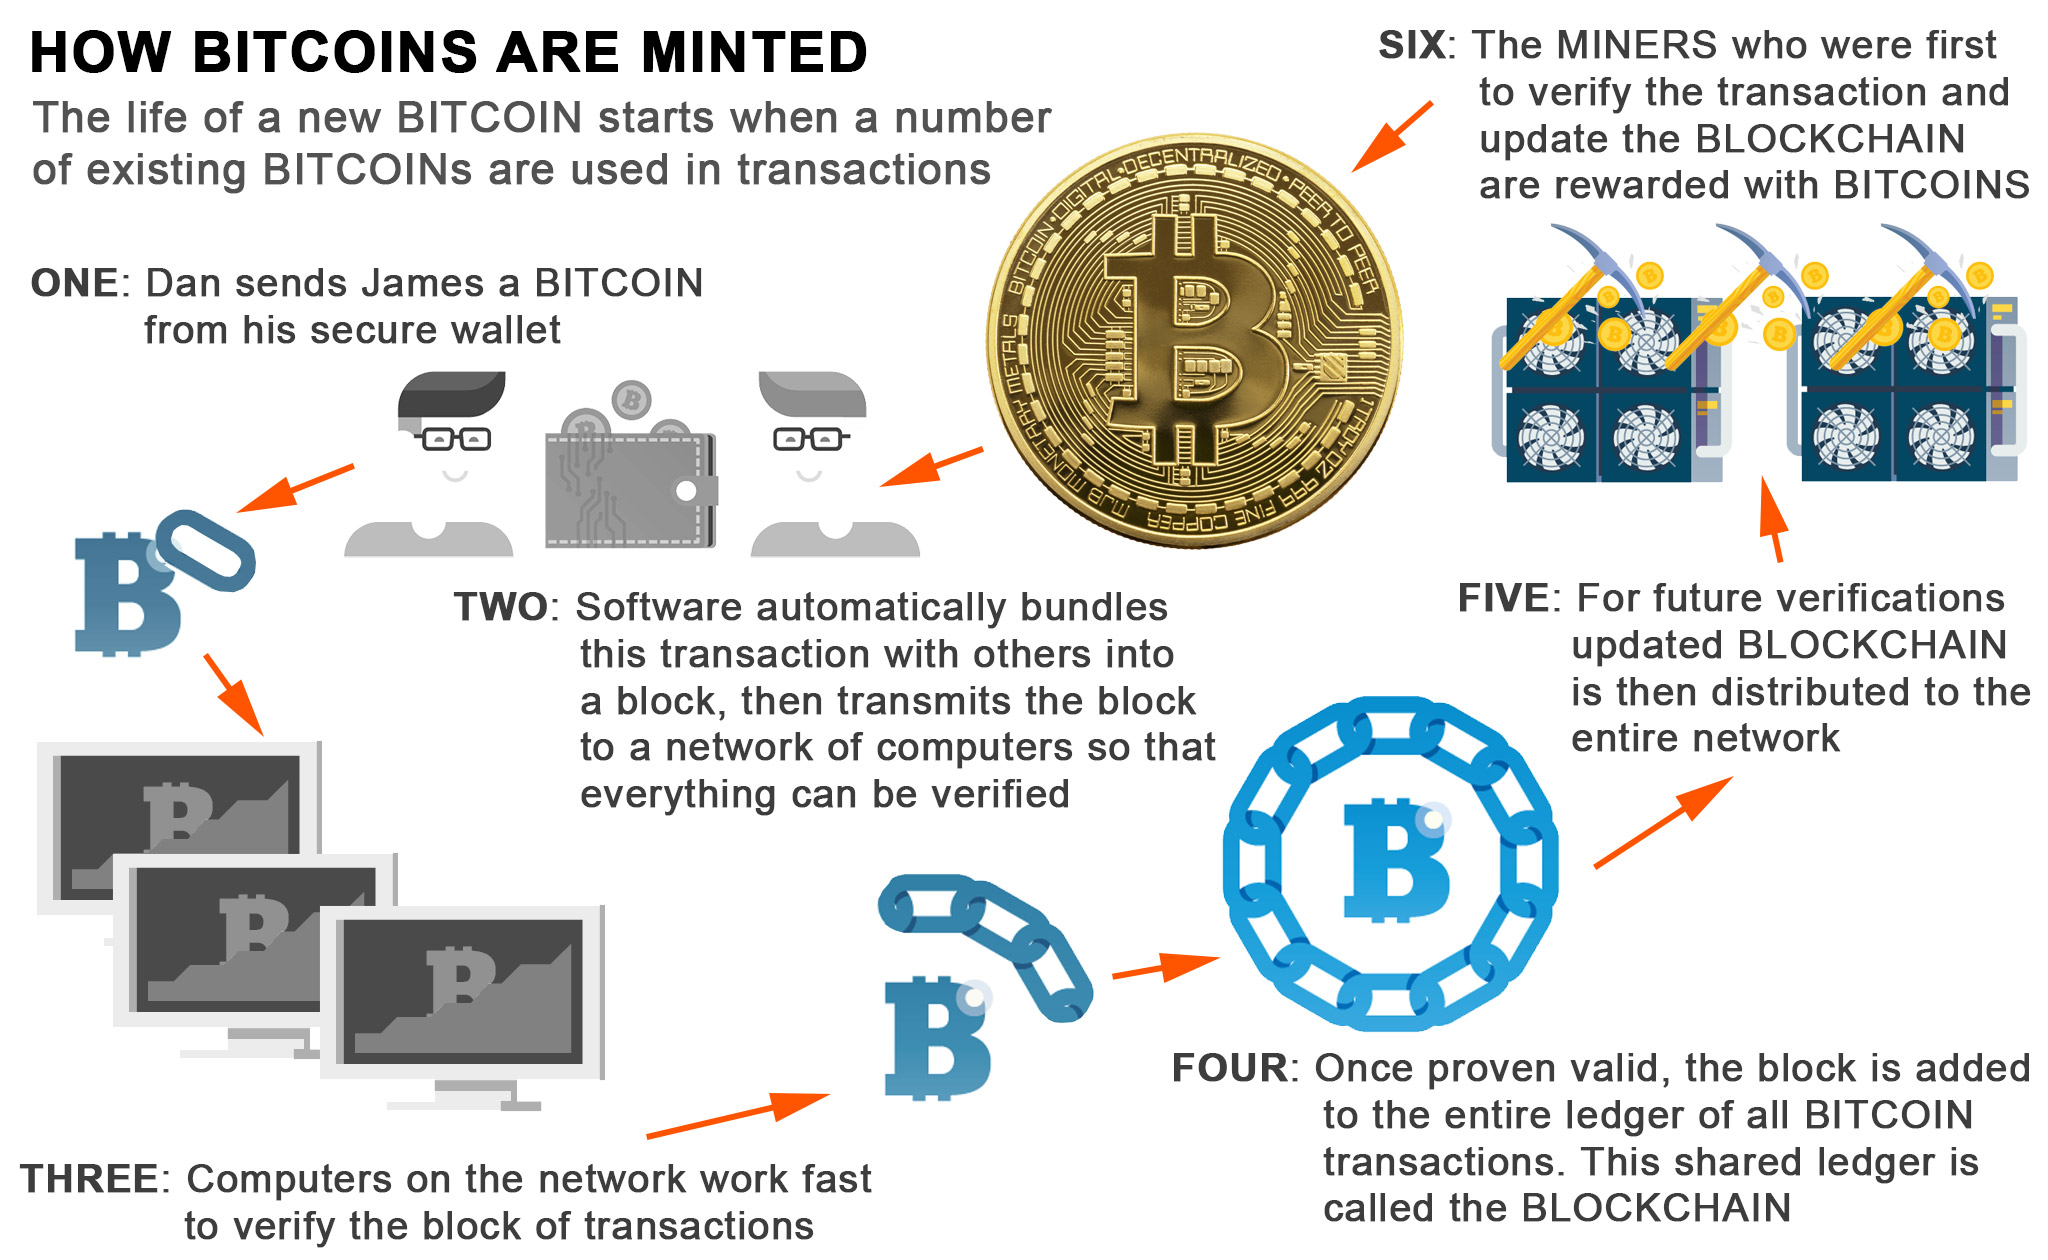 What cryptocurrency can be mined